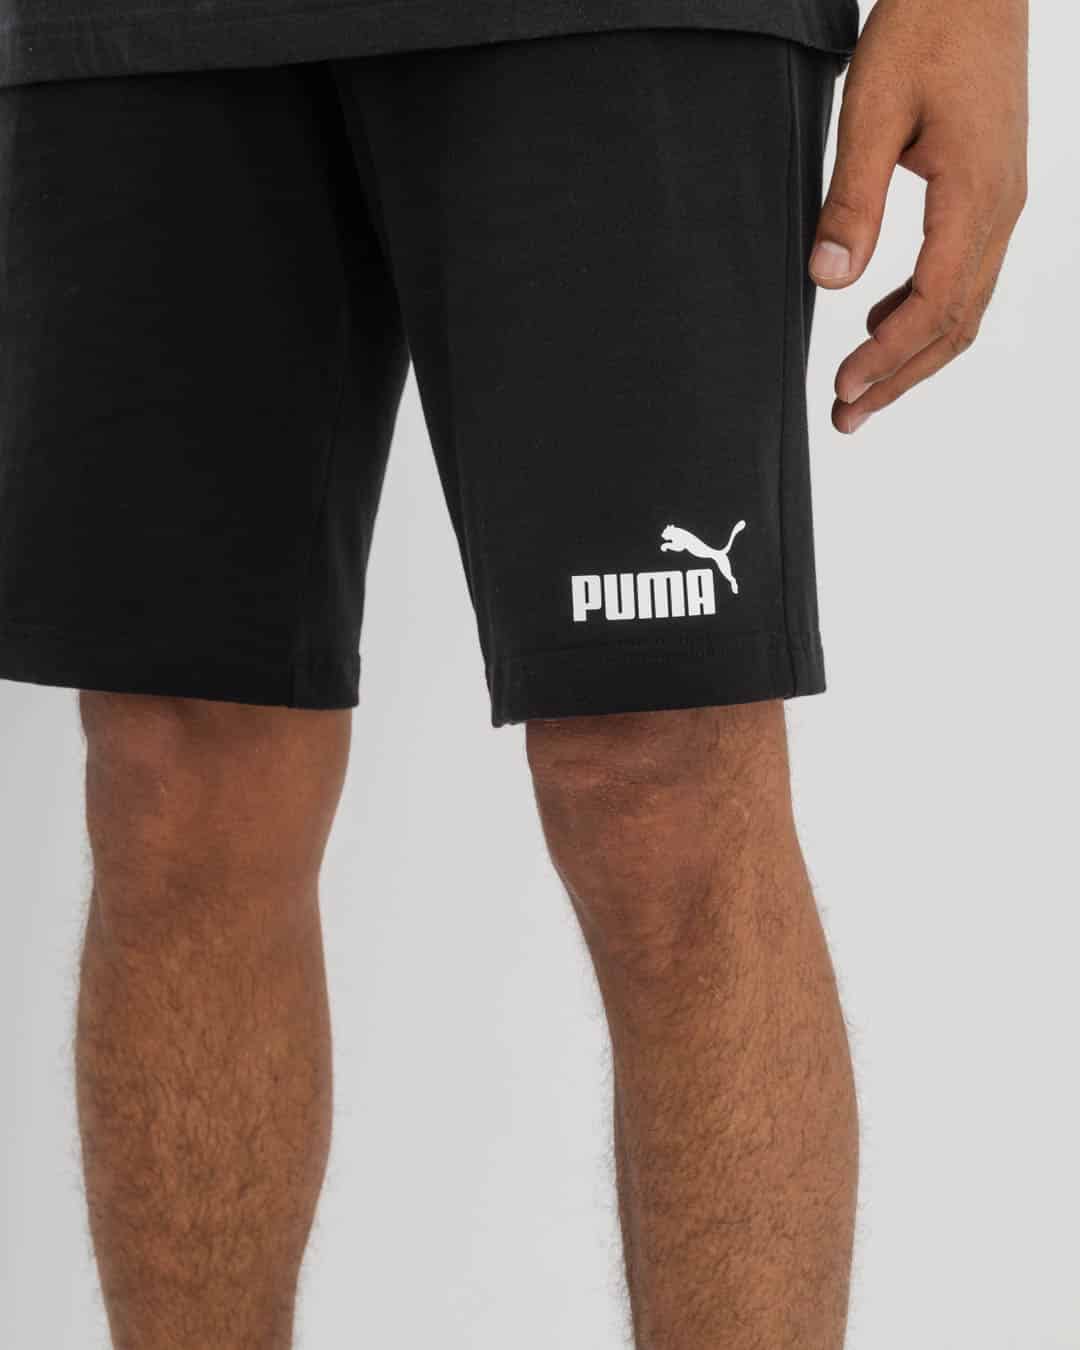 front view of man in black Puma t-shirt and black Puma shorts with Puma logo on bottom right.